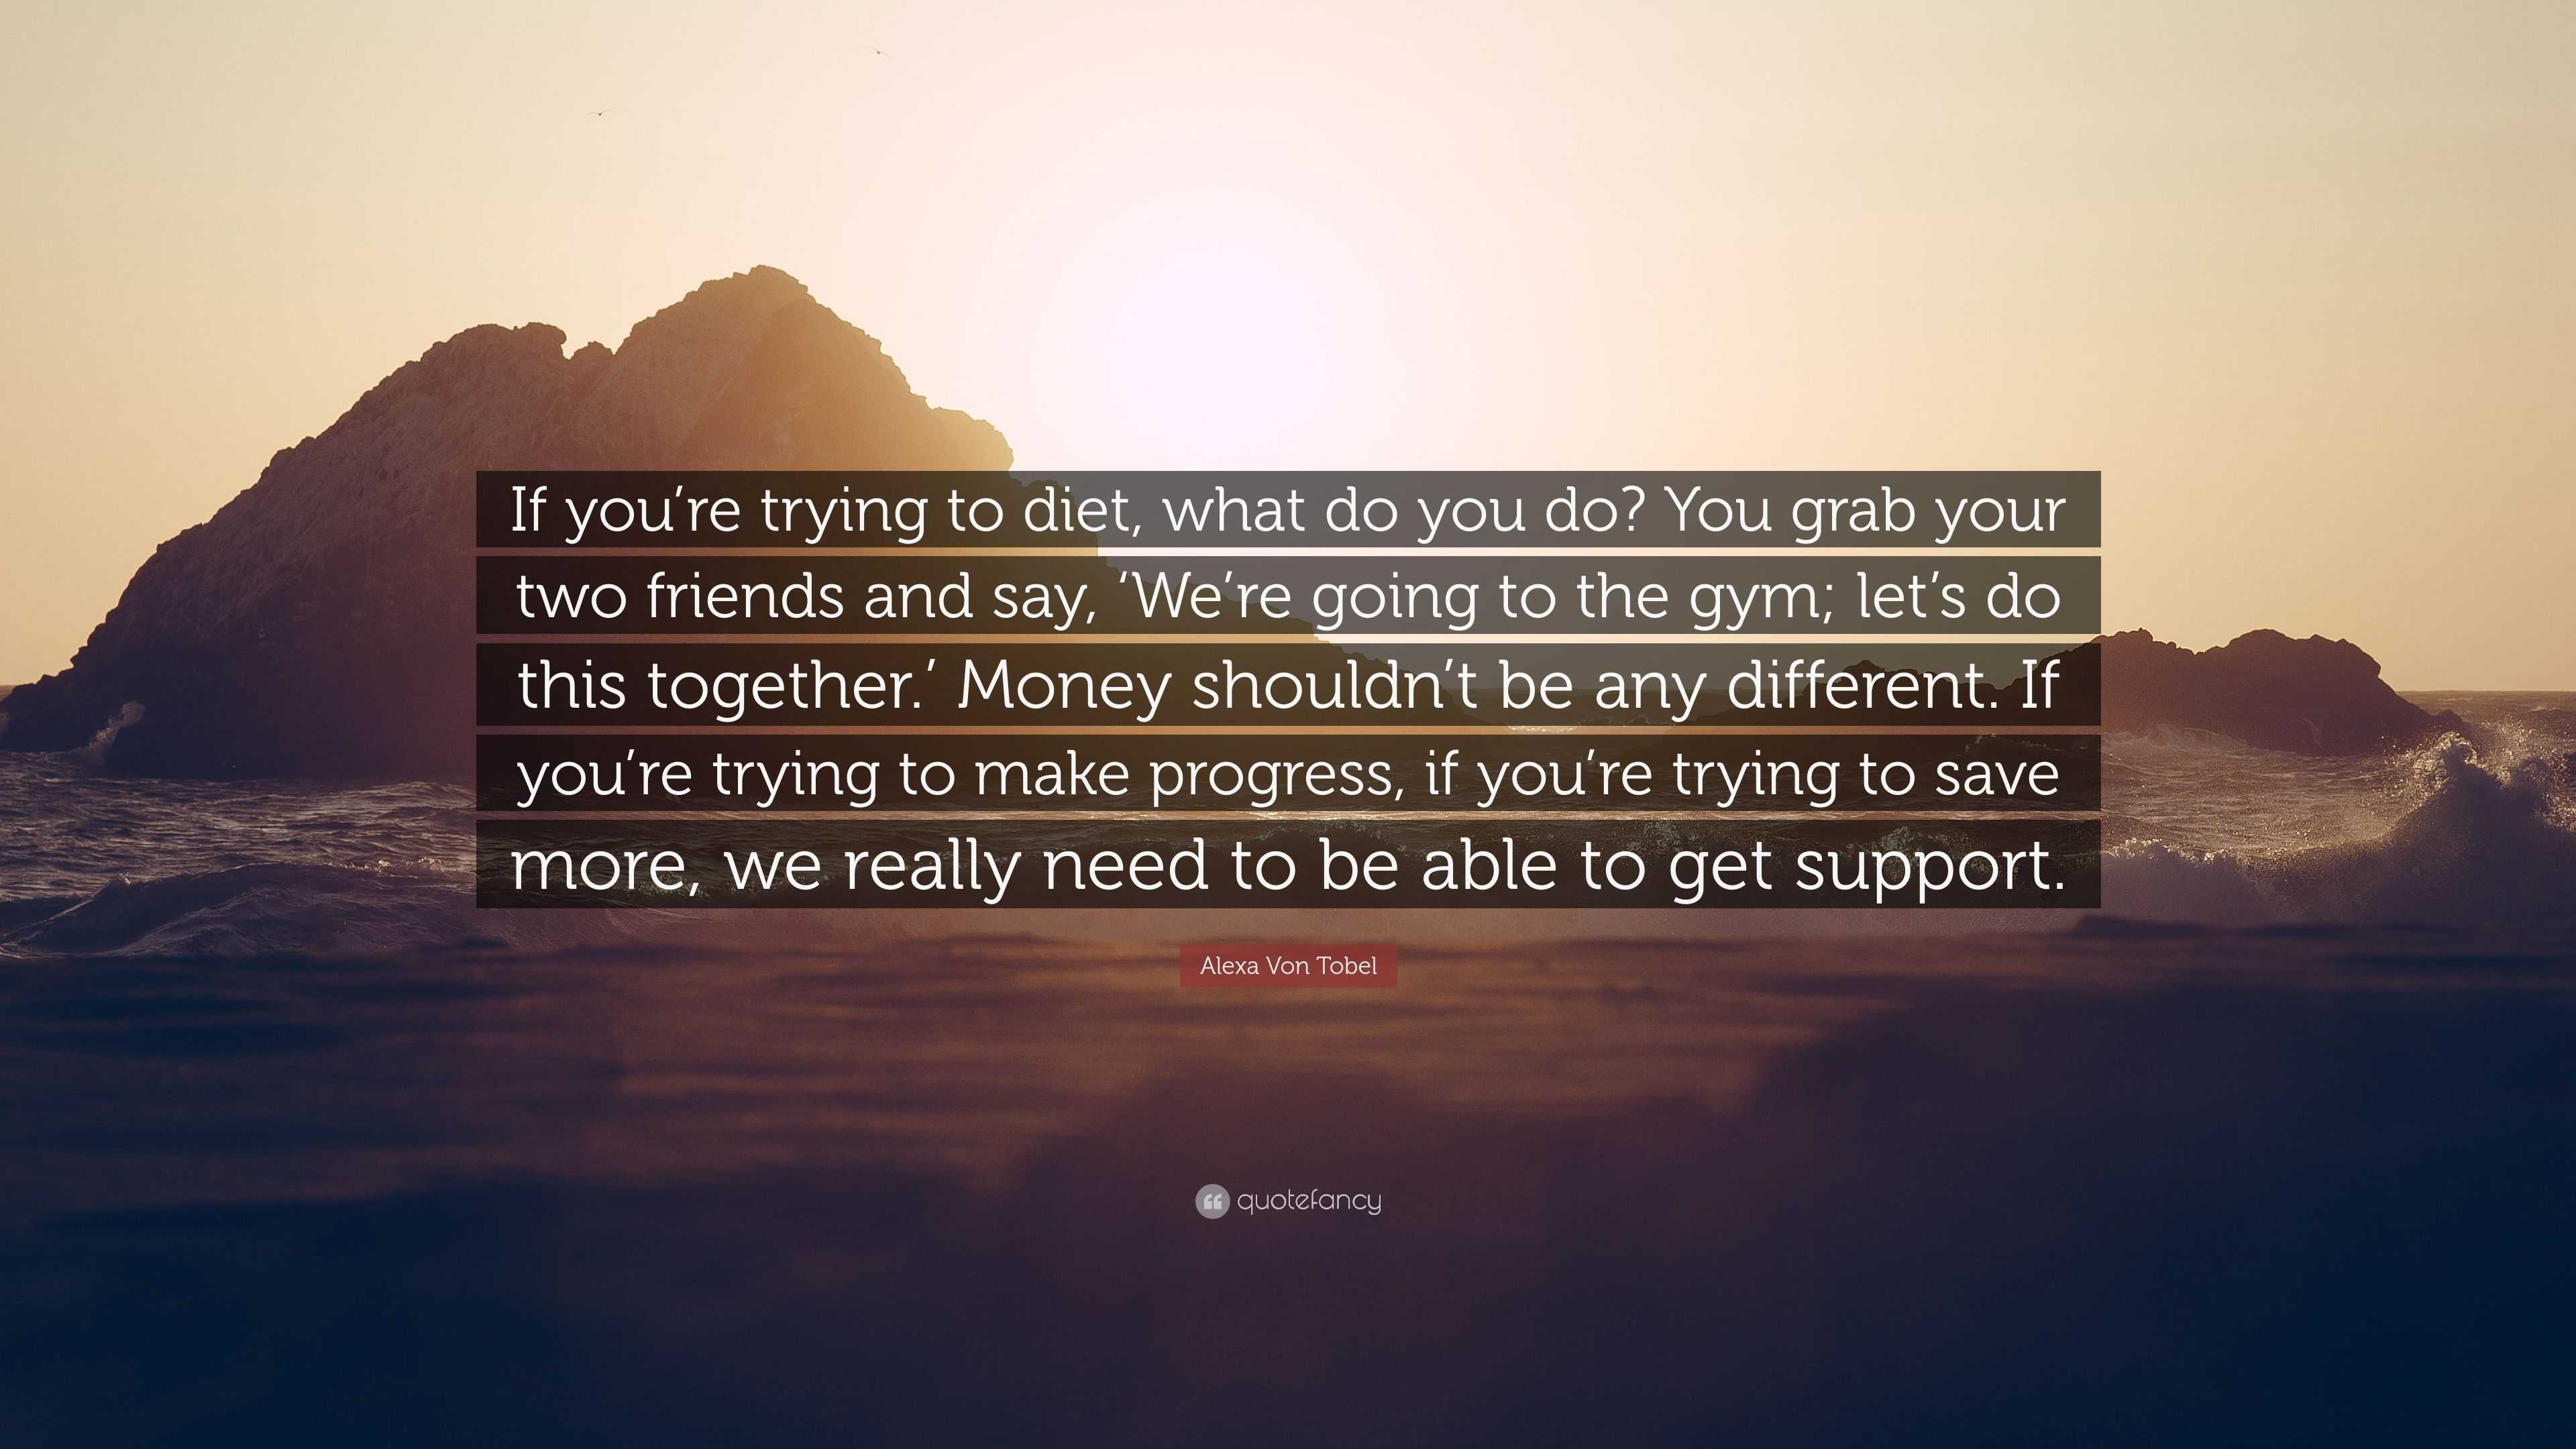 Alexa Von Tobel Quote: “If you're trying to diet, what do you do